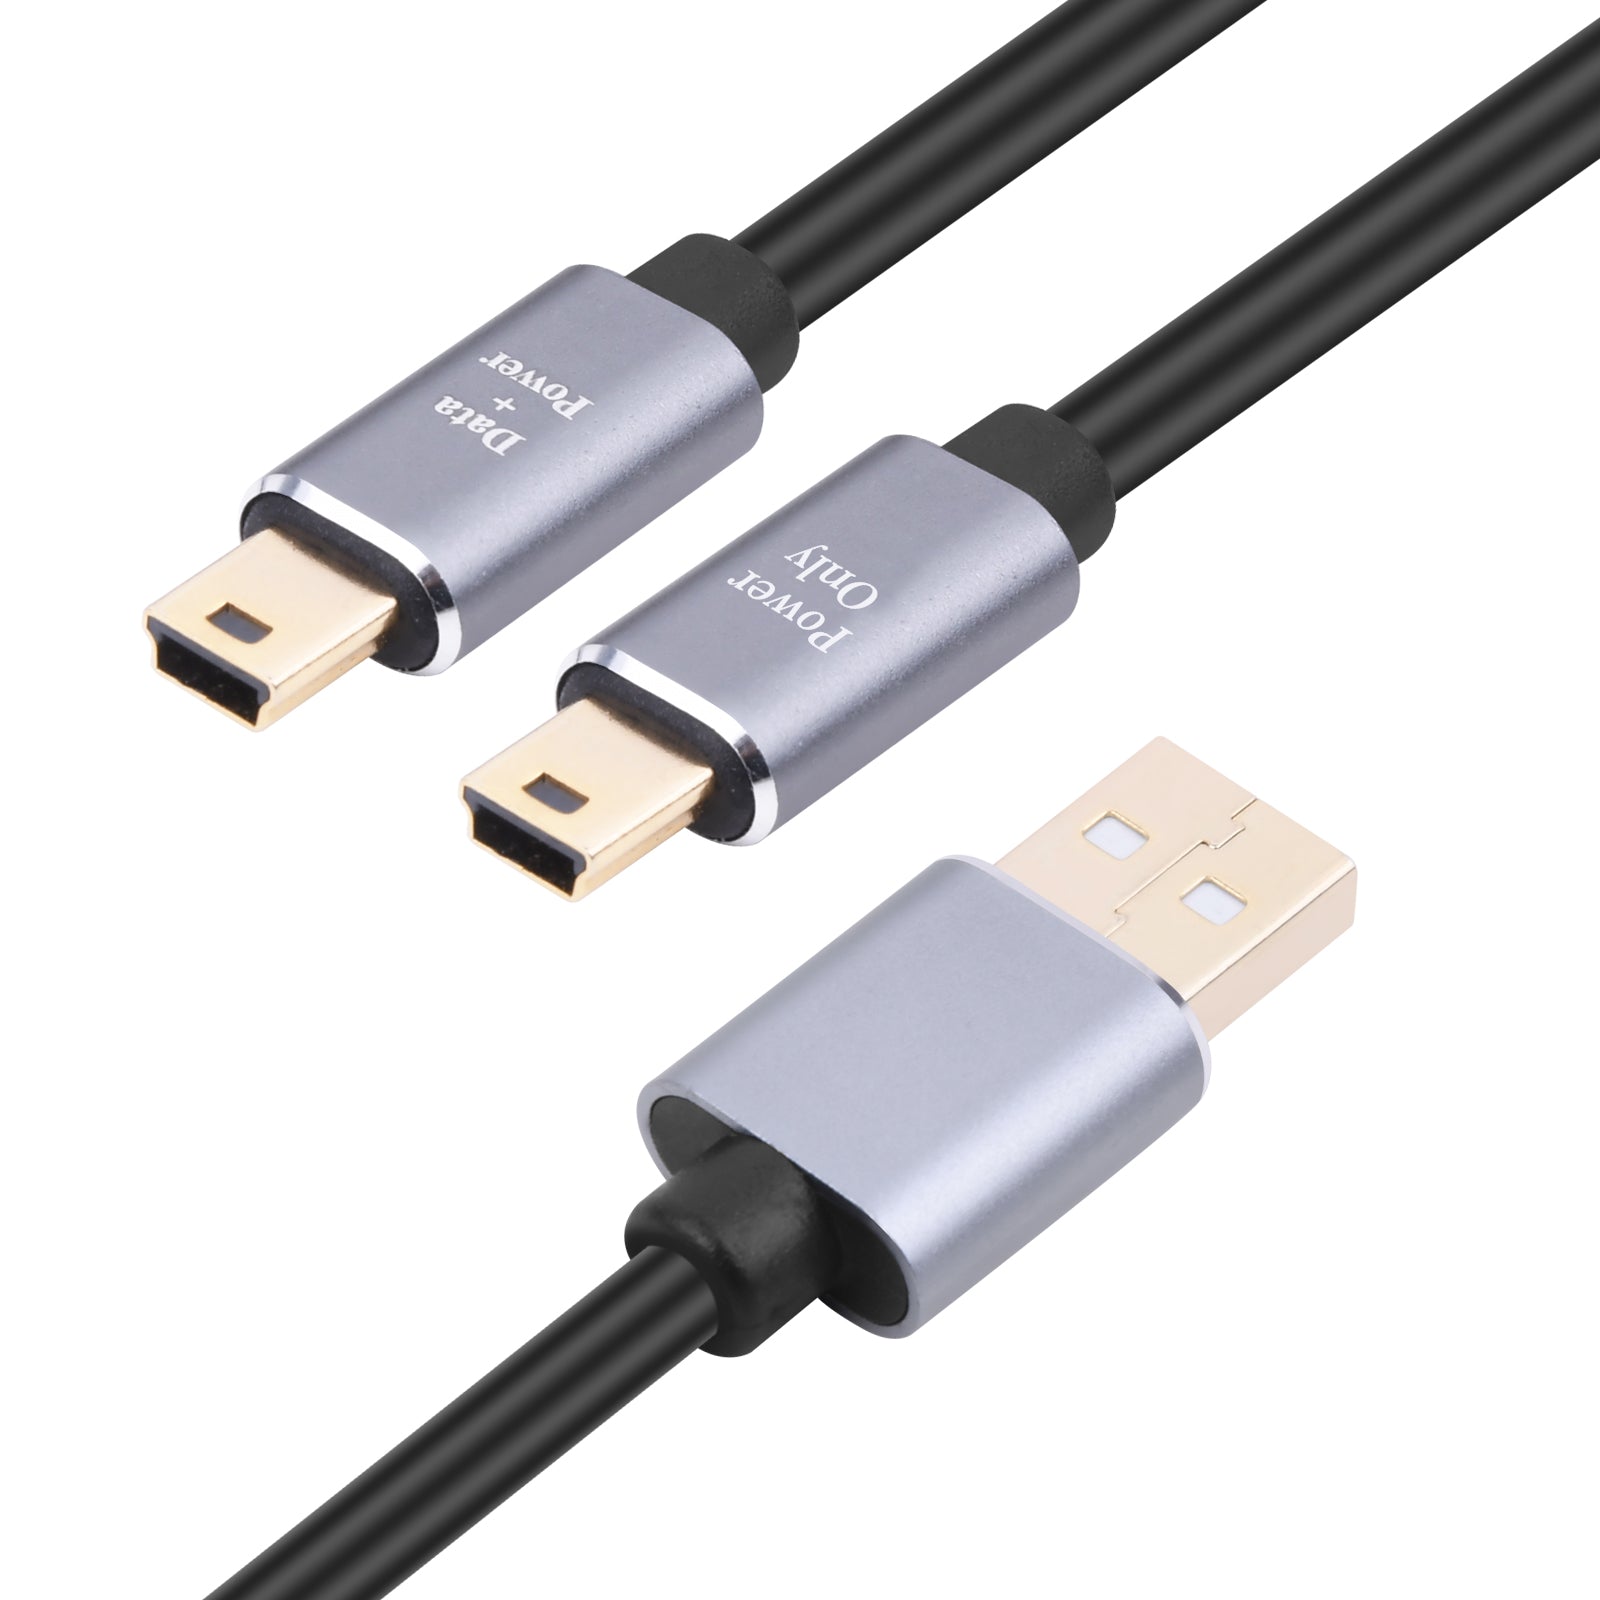 USB 2.0 A Male to Dual Mini B 5-pin Male Data Sync Charge Y Splitter Cable 1m